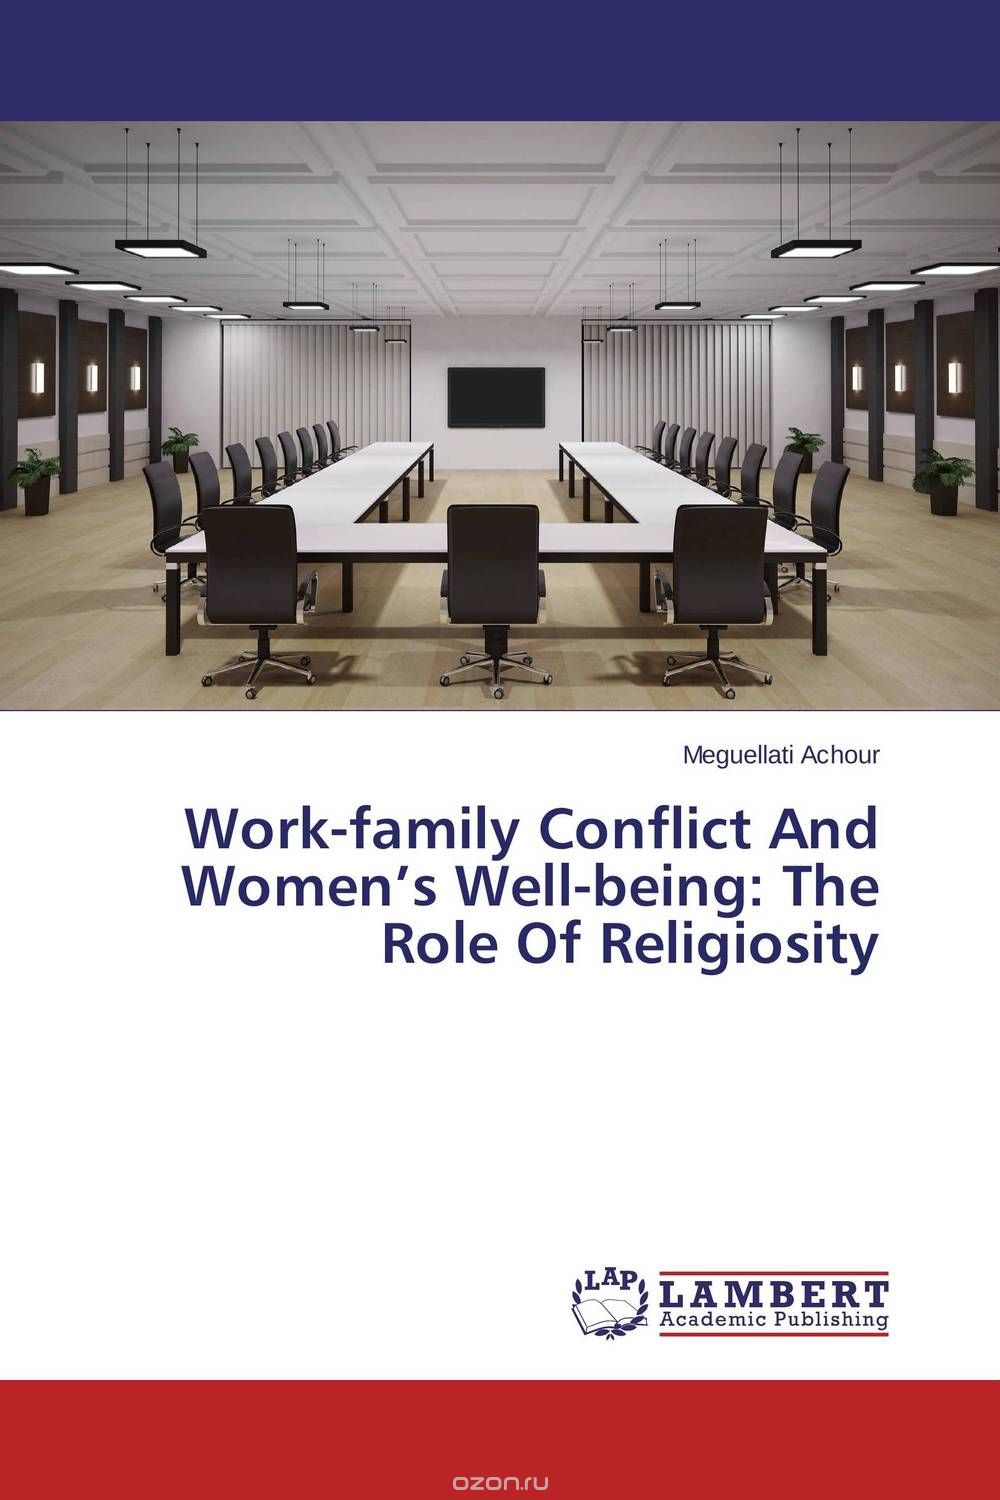 Скачать книгу "Work-family Conflict And Women’s Well-being: The Role Of Religiosity"